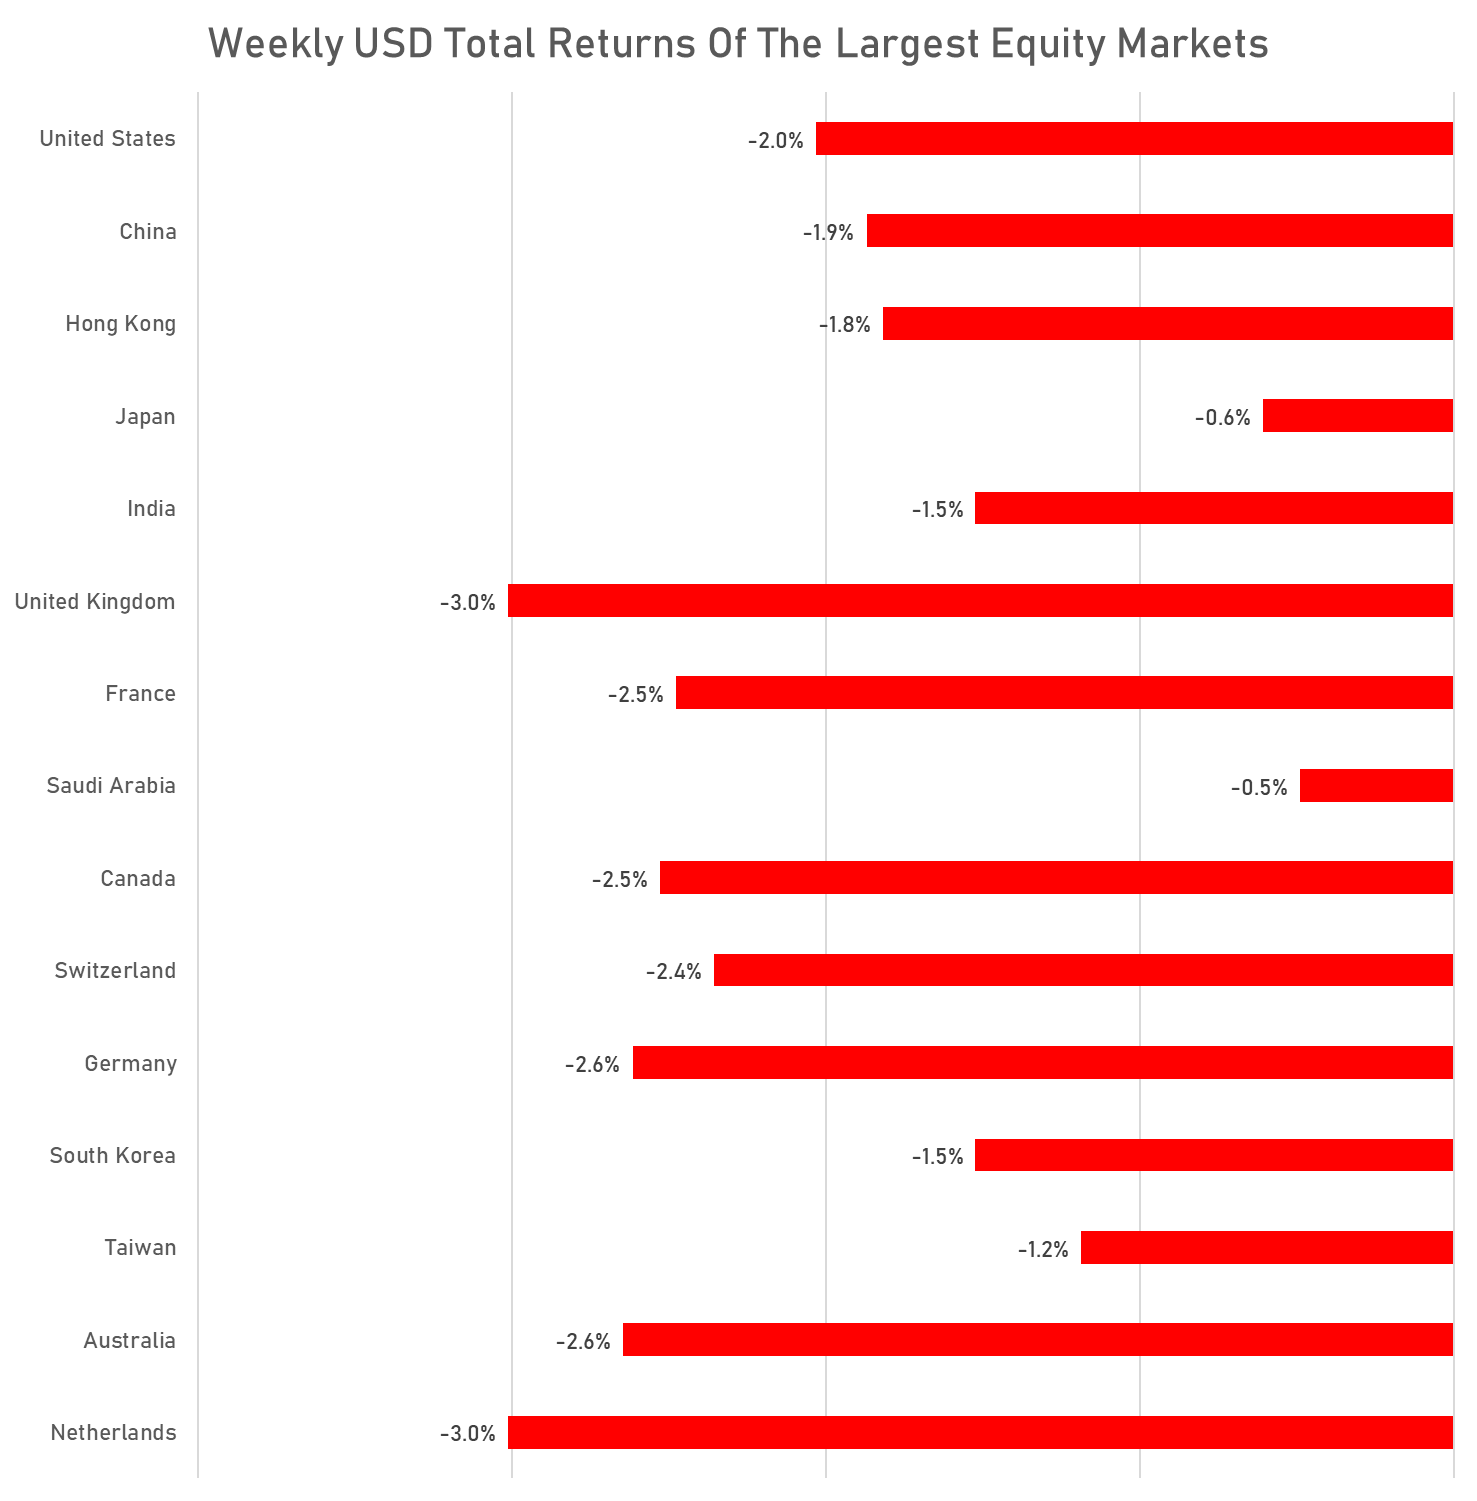 Weekly USD Total Returns of global equity markets | Sources: phipost.com, FactSet data